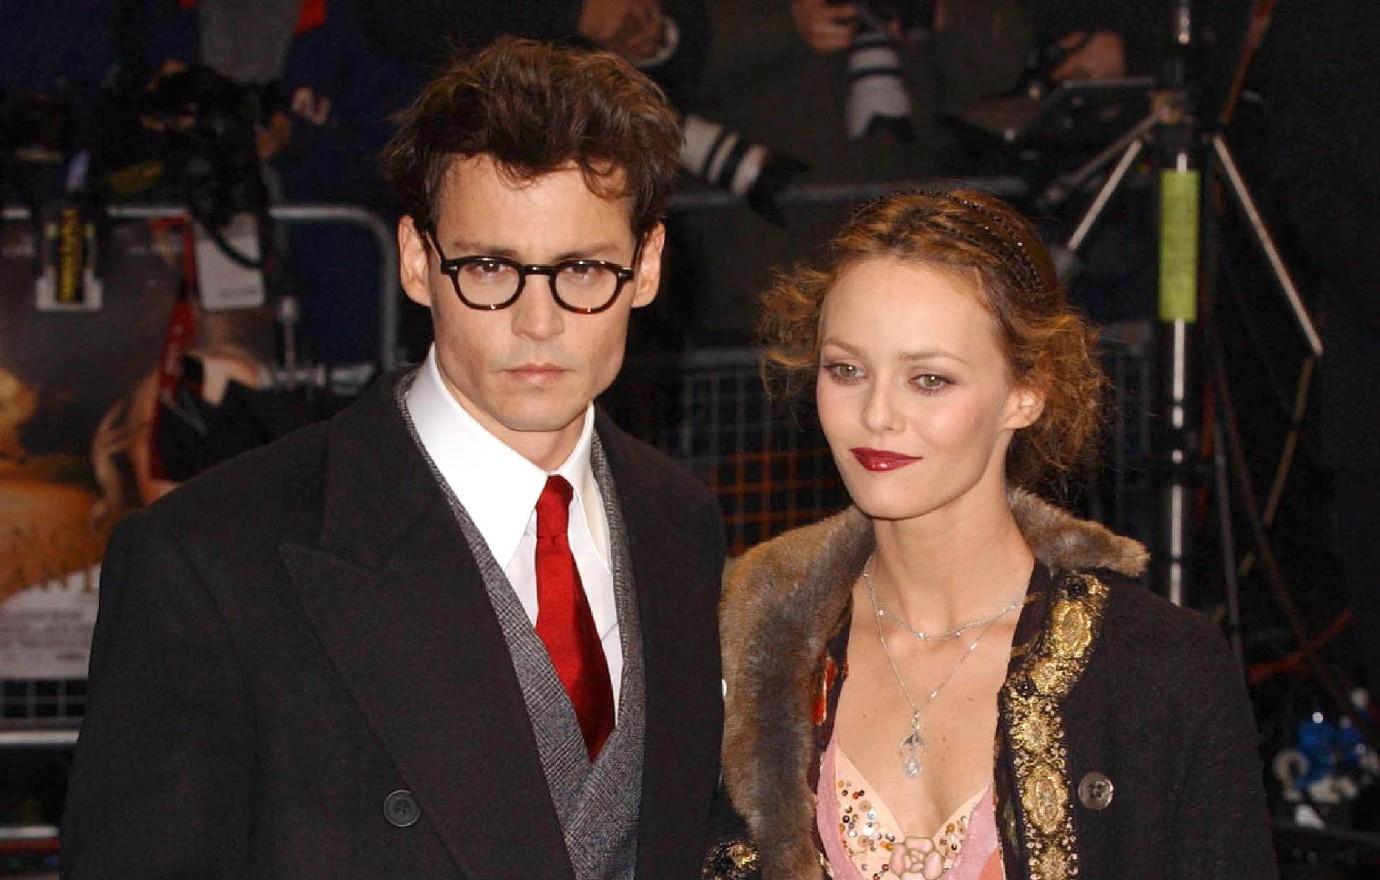 Johnny Depps Ex Vanessa Paradis Attends Fashion Show Amid His Trial